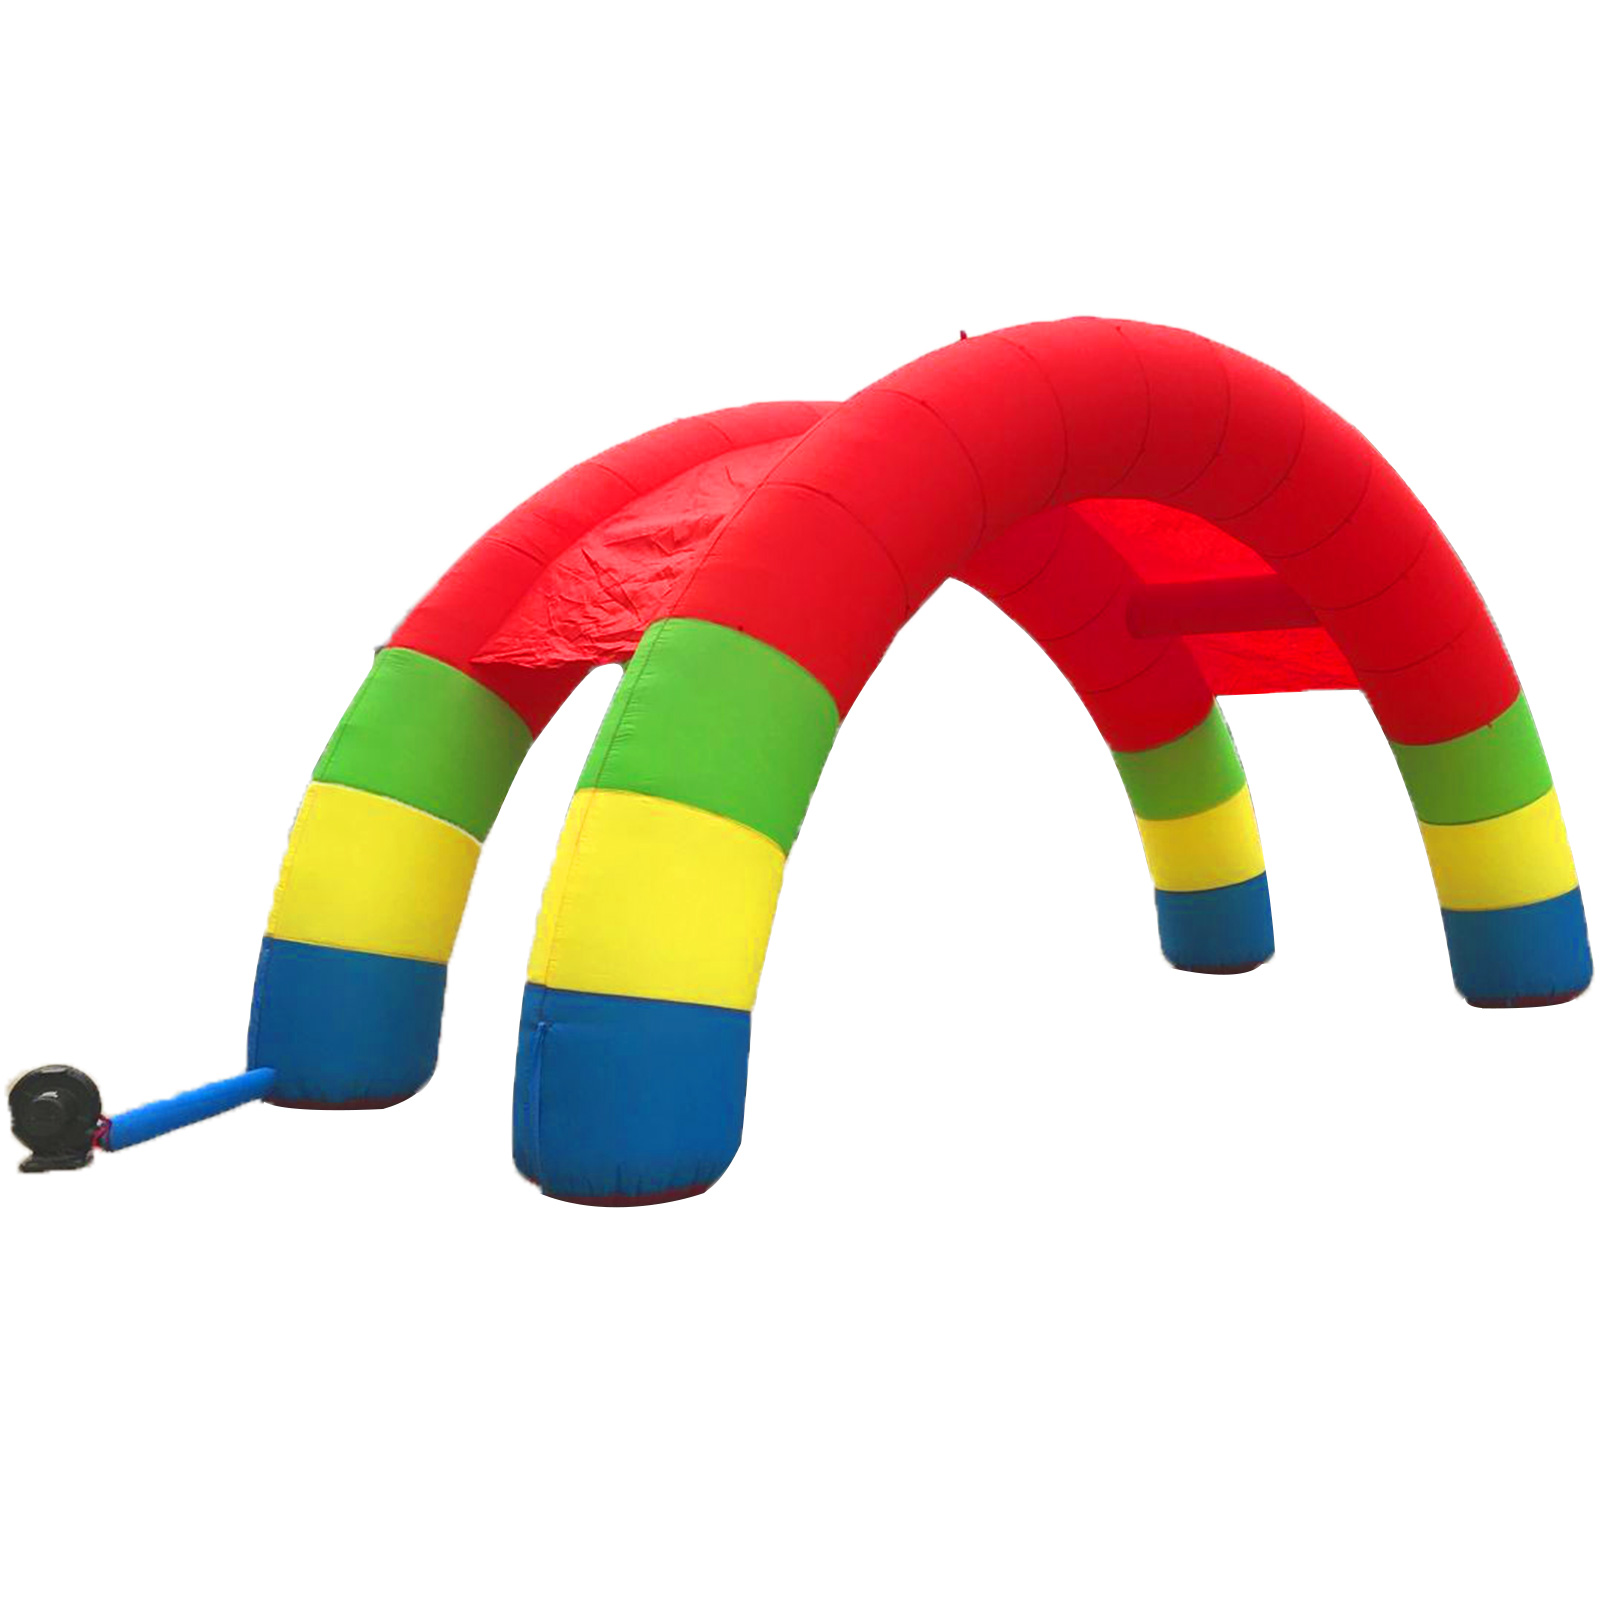 Inflatable Rainbow Arched door Advertising Arch 26ft*10ft Holiday Decorat 8*4m 